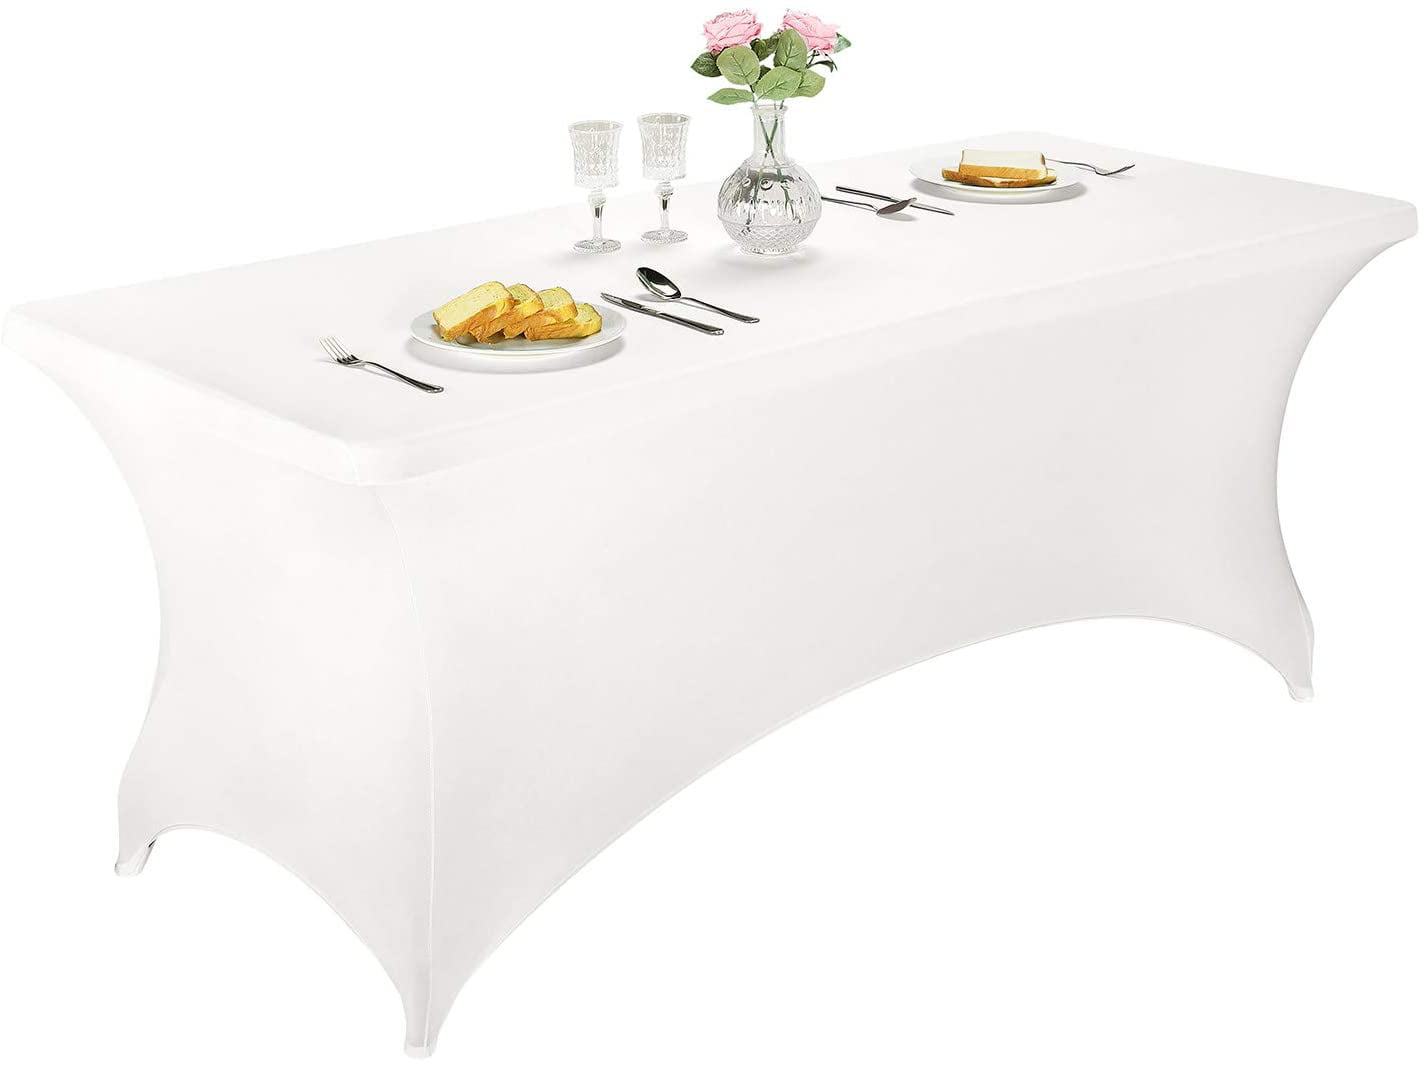 Tablecloth Table Cover Spandex 6 Ft White Rectangular for Banquet Wedding Party 